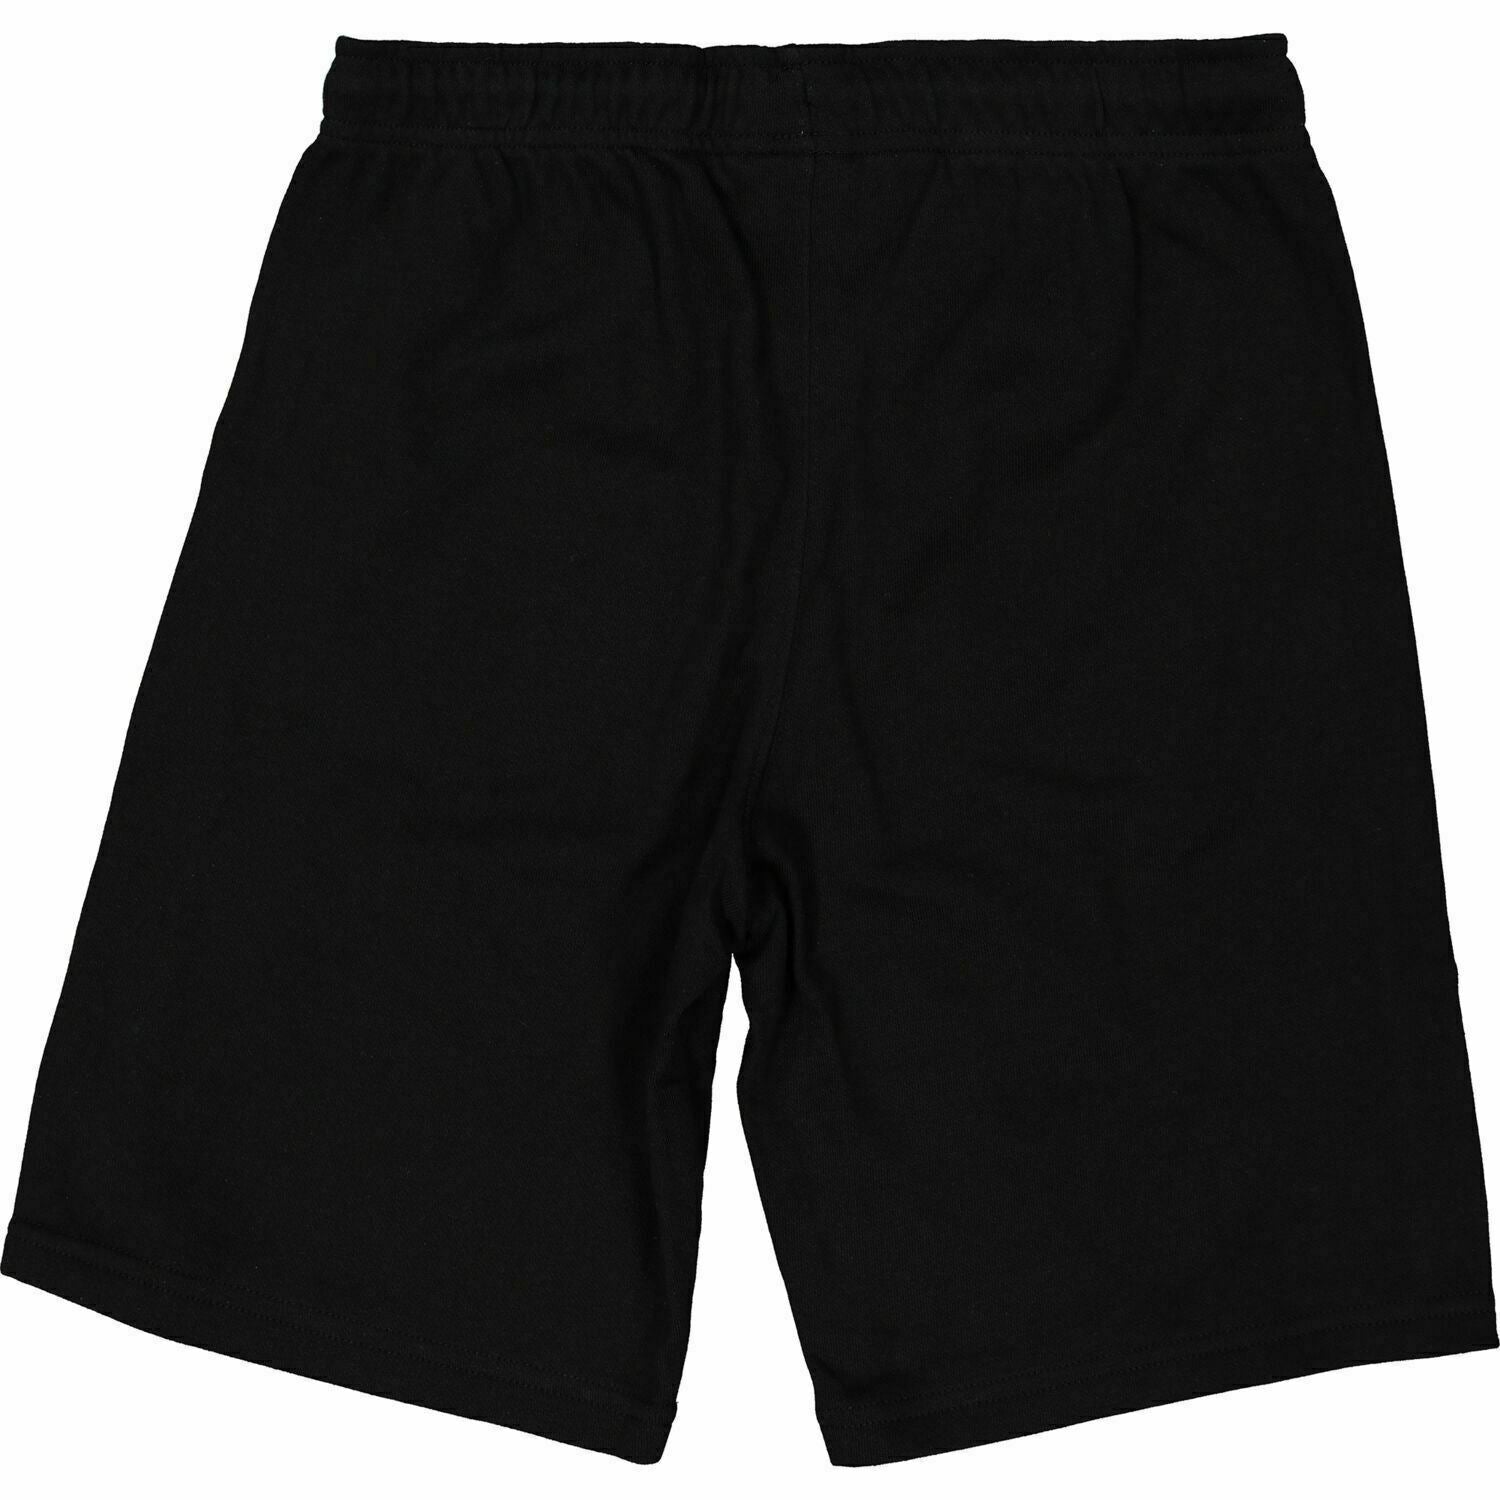 CHAMPION Boys' Sweat Shorts, Black / Side Tape, 5 years to 6 years